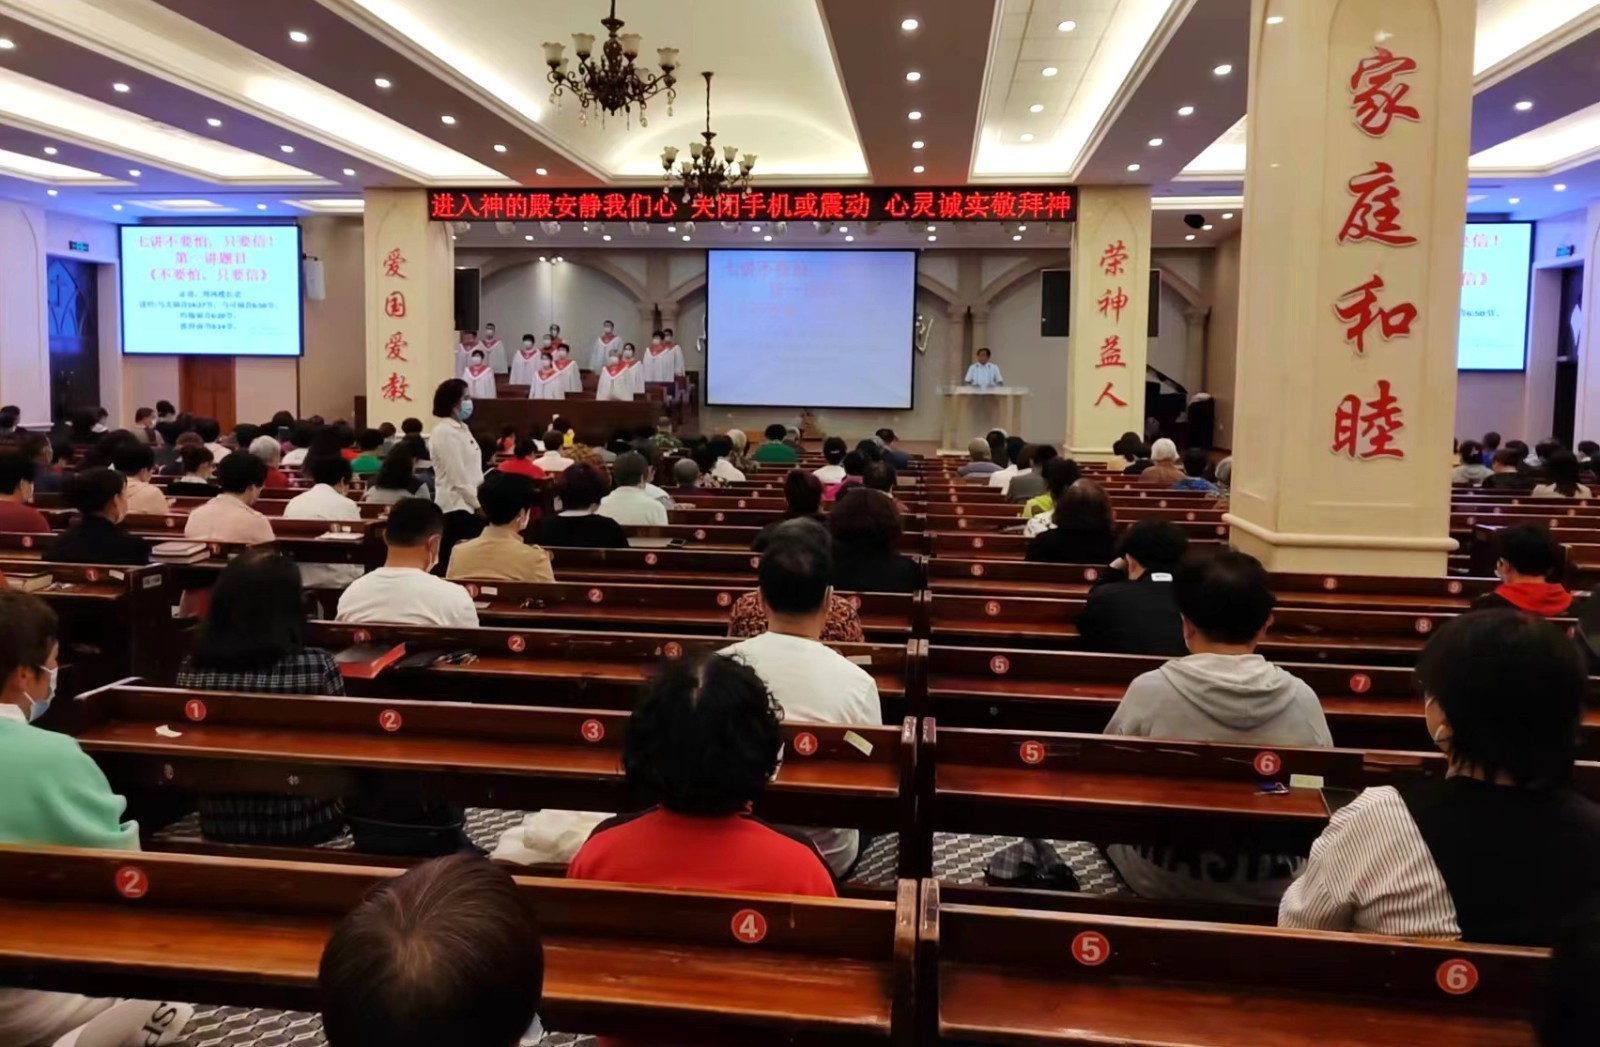 Wenhua Road Church in Pulandian District, Dalian, Liaoning, resumed its in-person service on Wednesday, June 8, 2022.